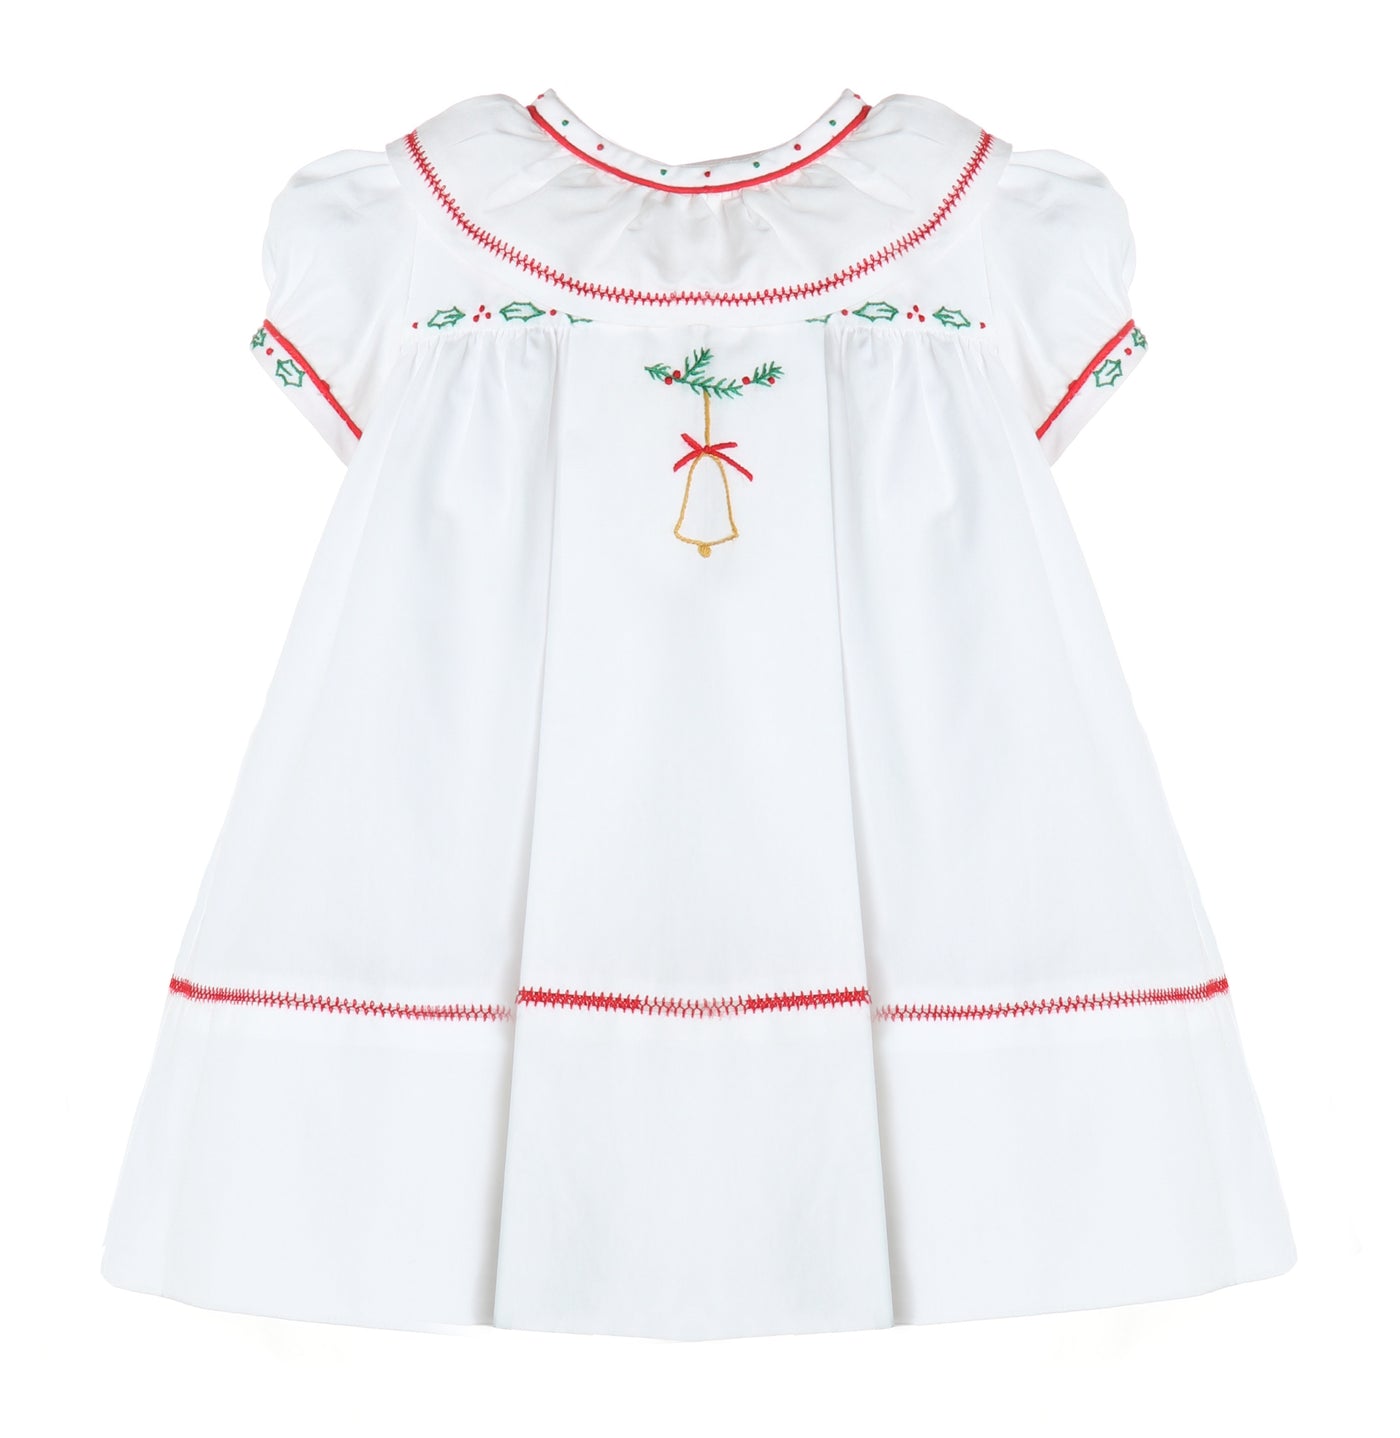 Vintage Christmas Ruffle Dress with Red Embroidery - Mumzie's Children